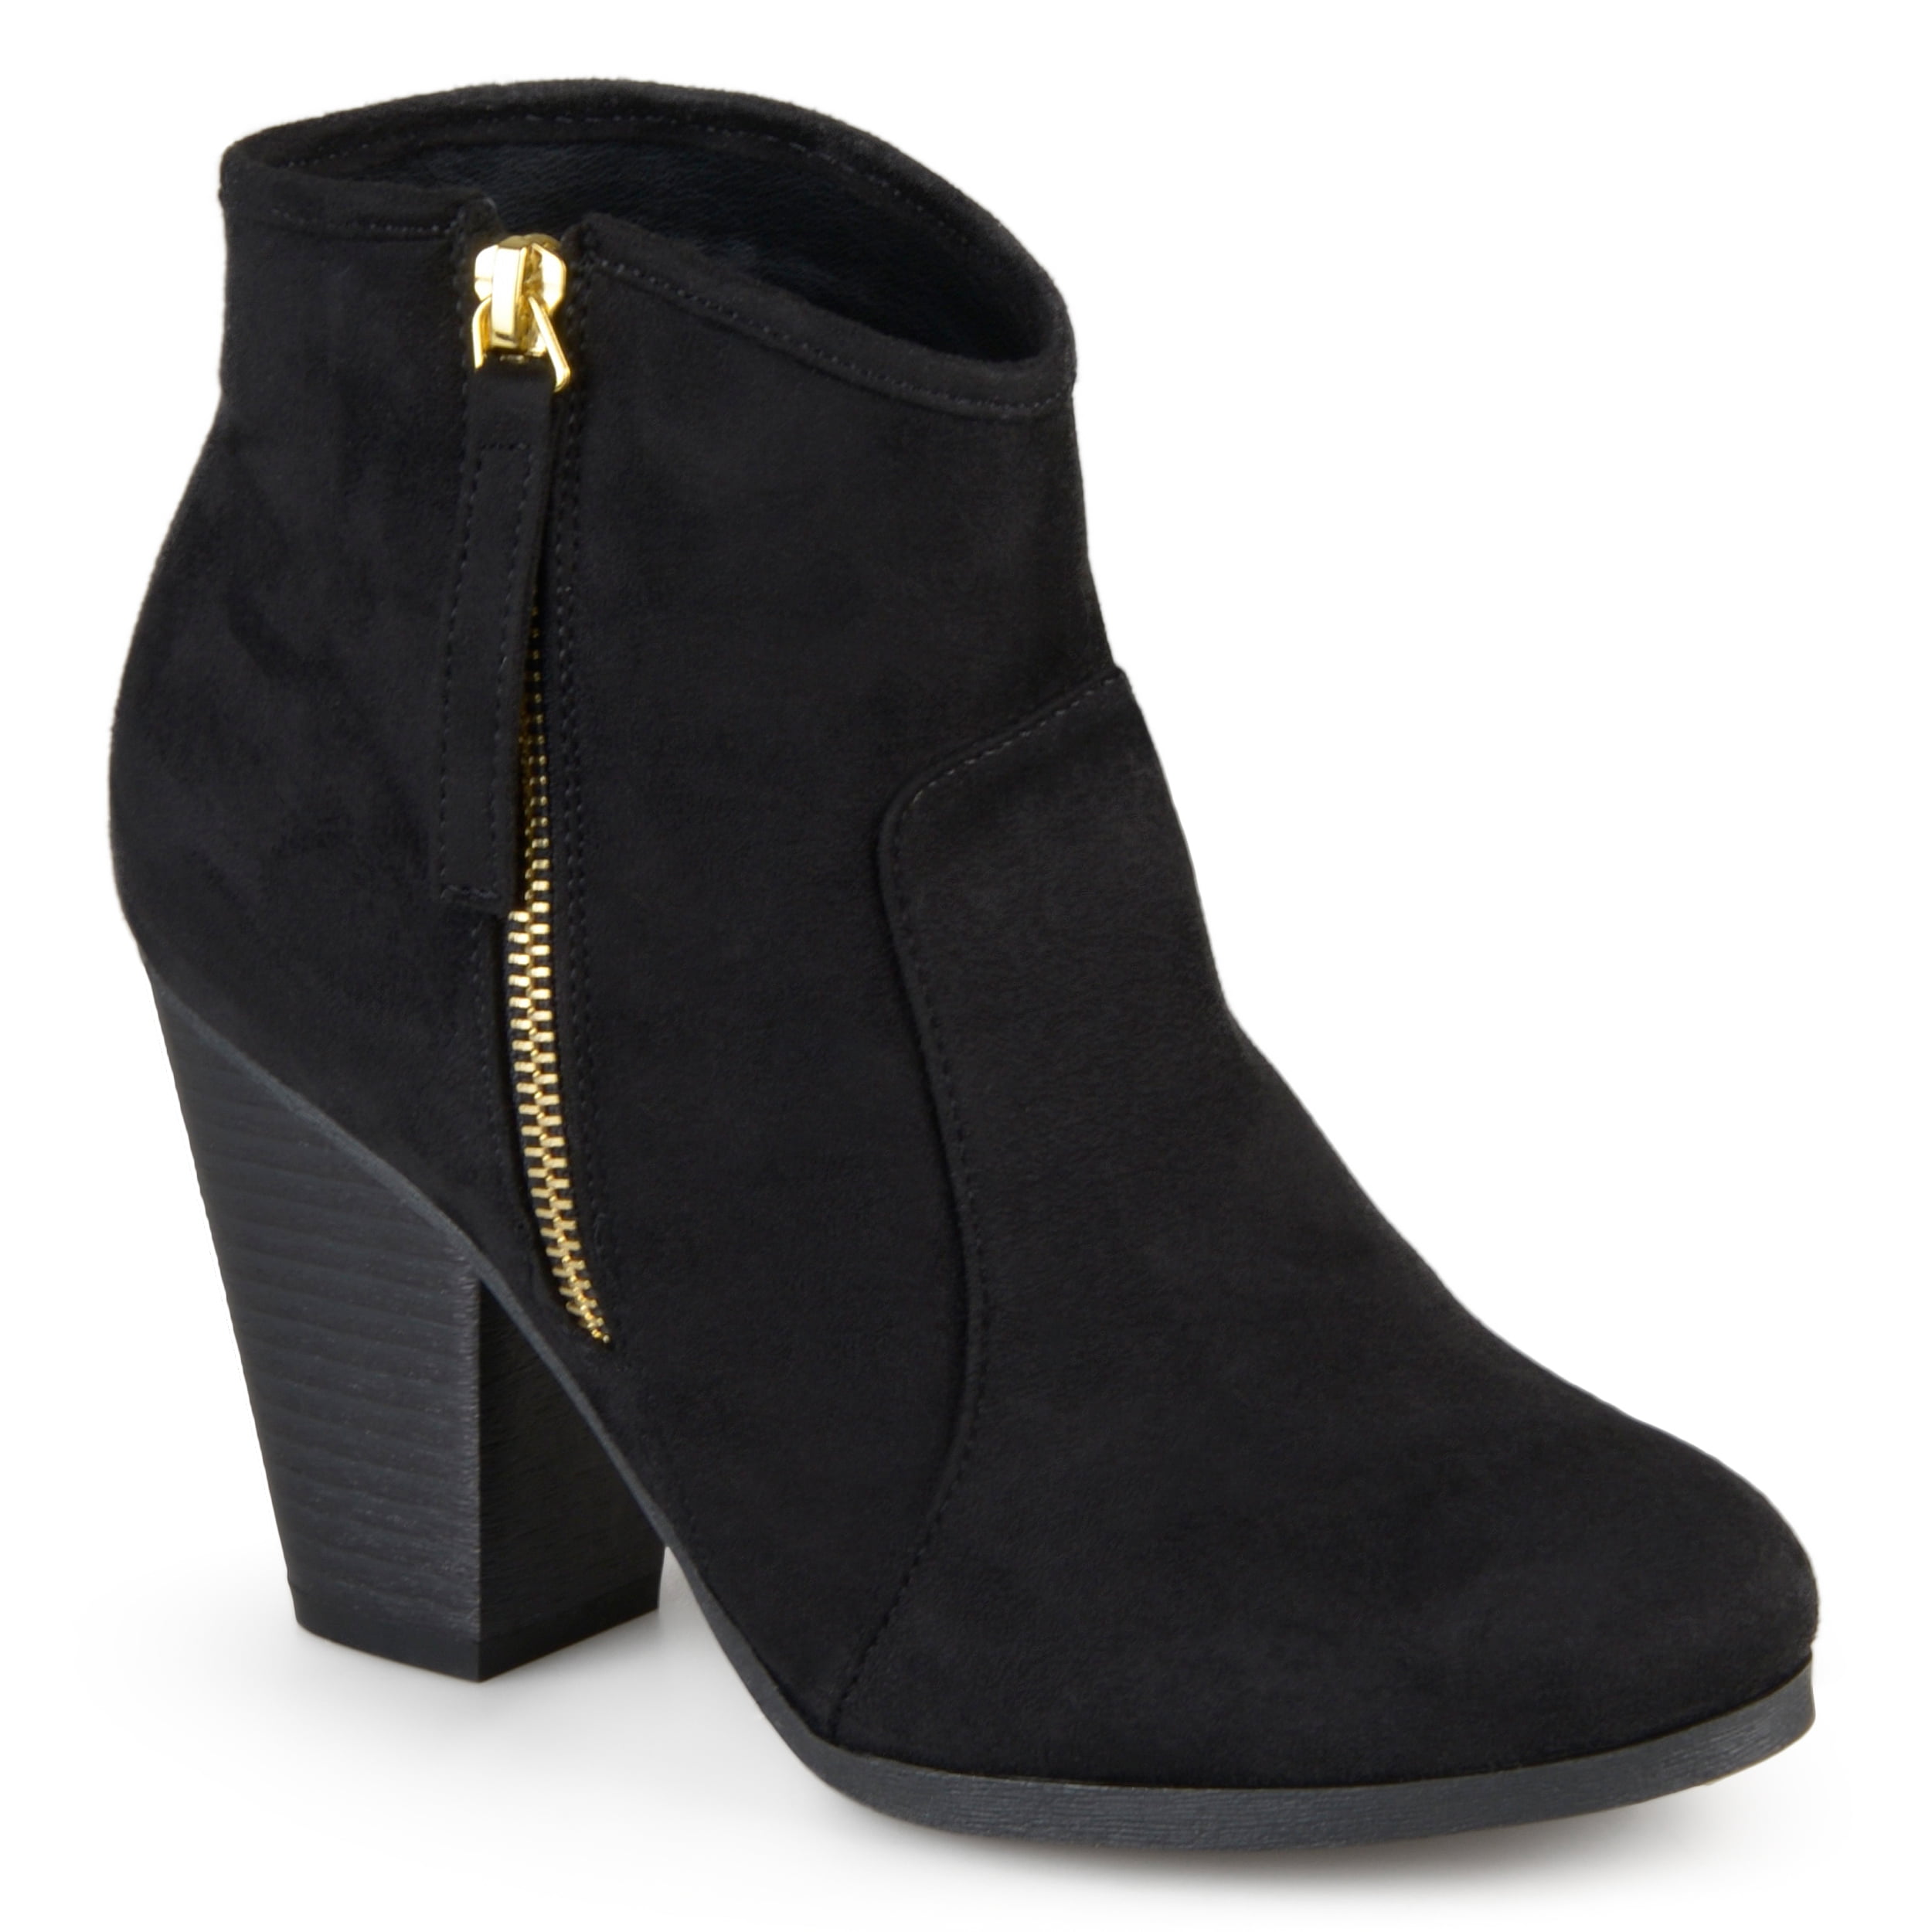 Details about   New Women's Fashion Ankle Boots Wedge Heel Round Toe Casual Suede Fabric Boots D